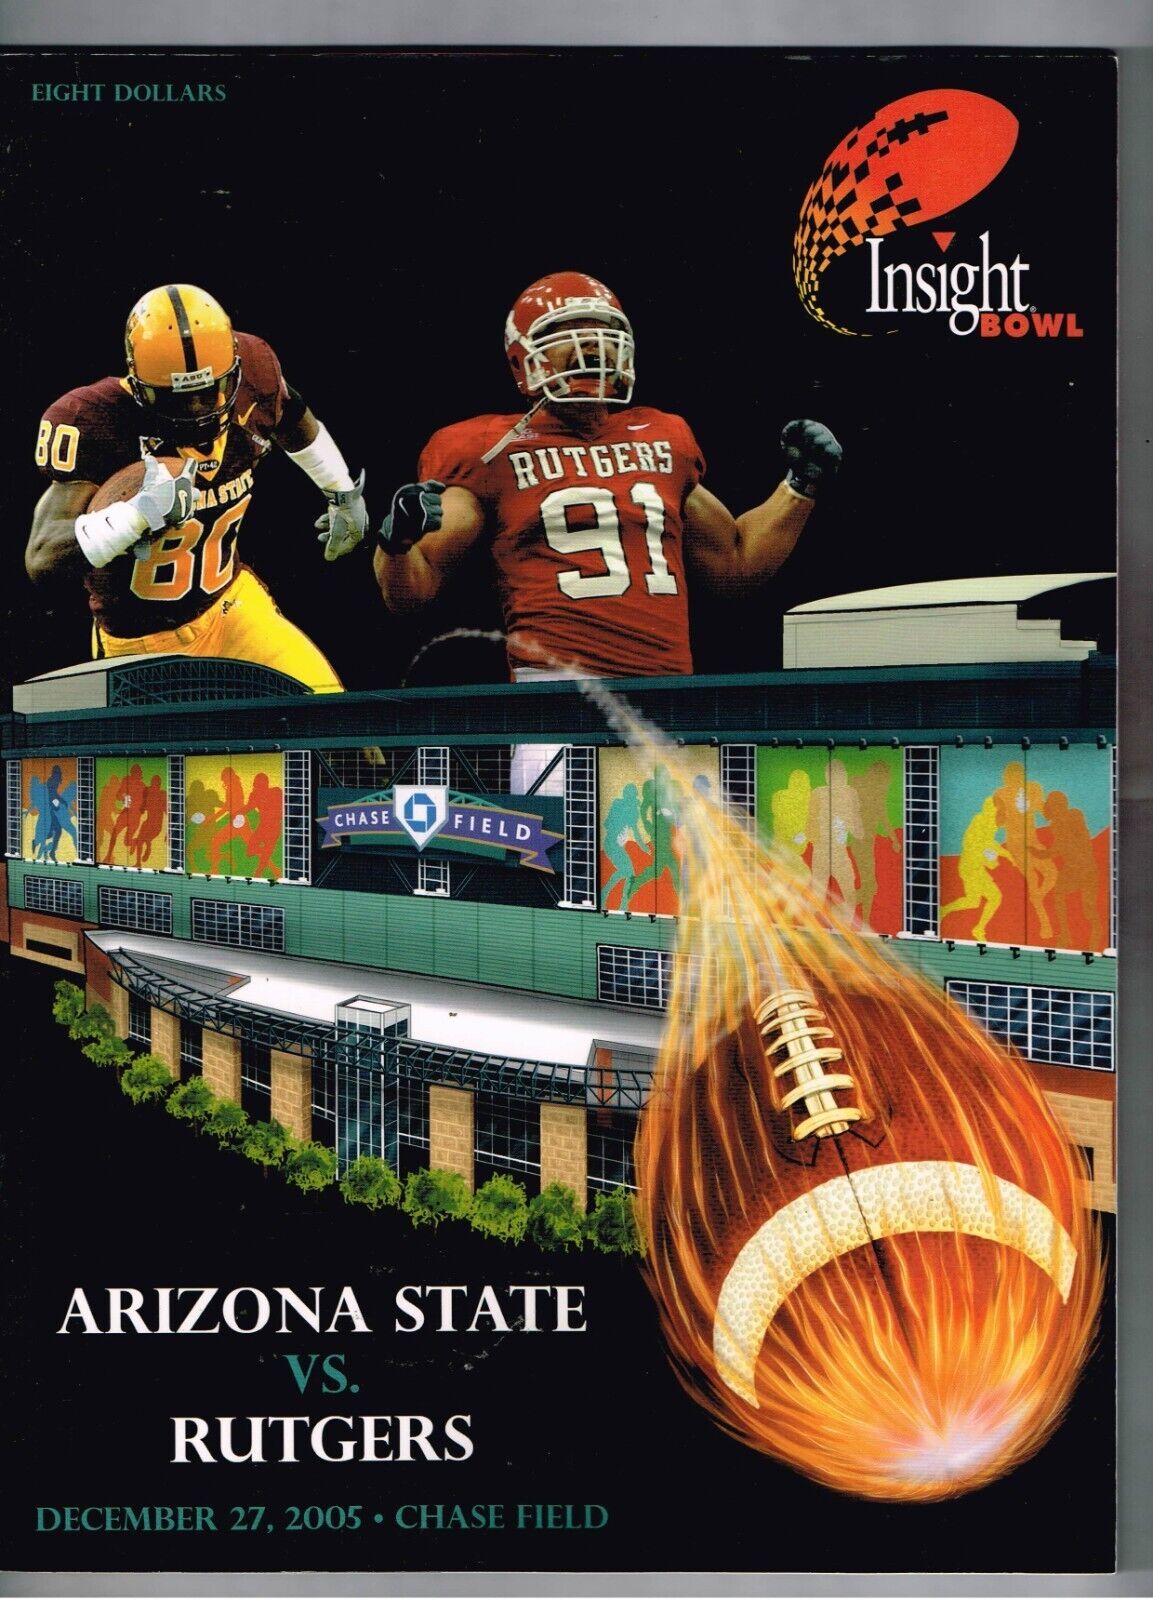 Primary image for 2005 Insight Bowl Game Program Arizona State Sun Devils Rutgers Scarlet Knights